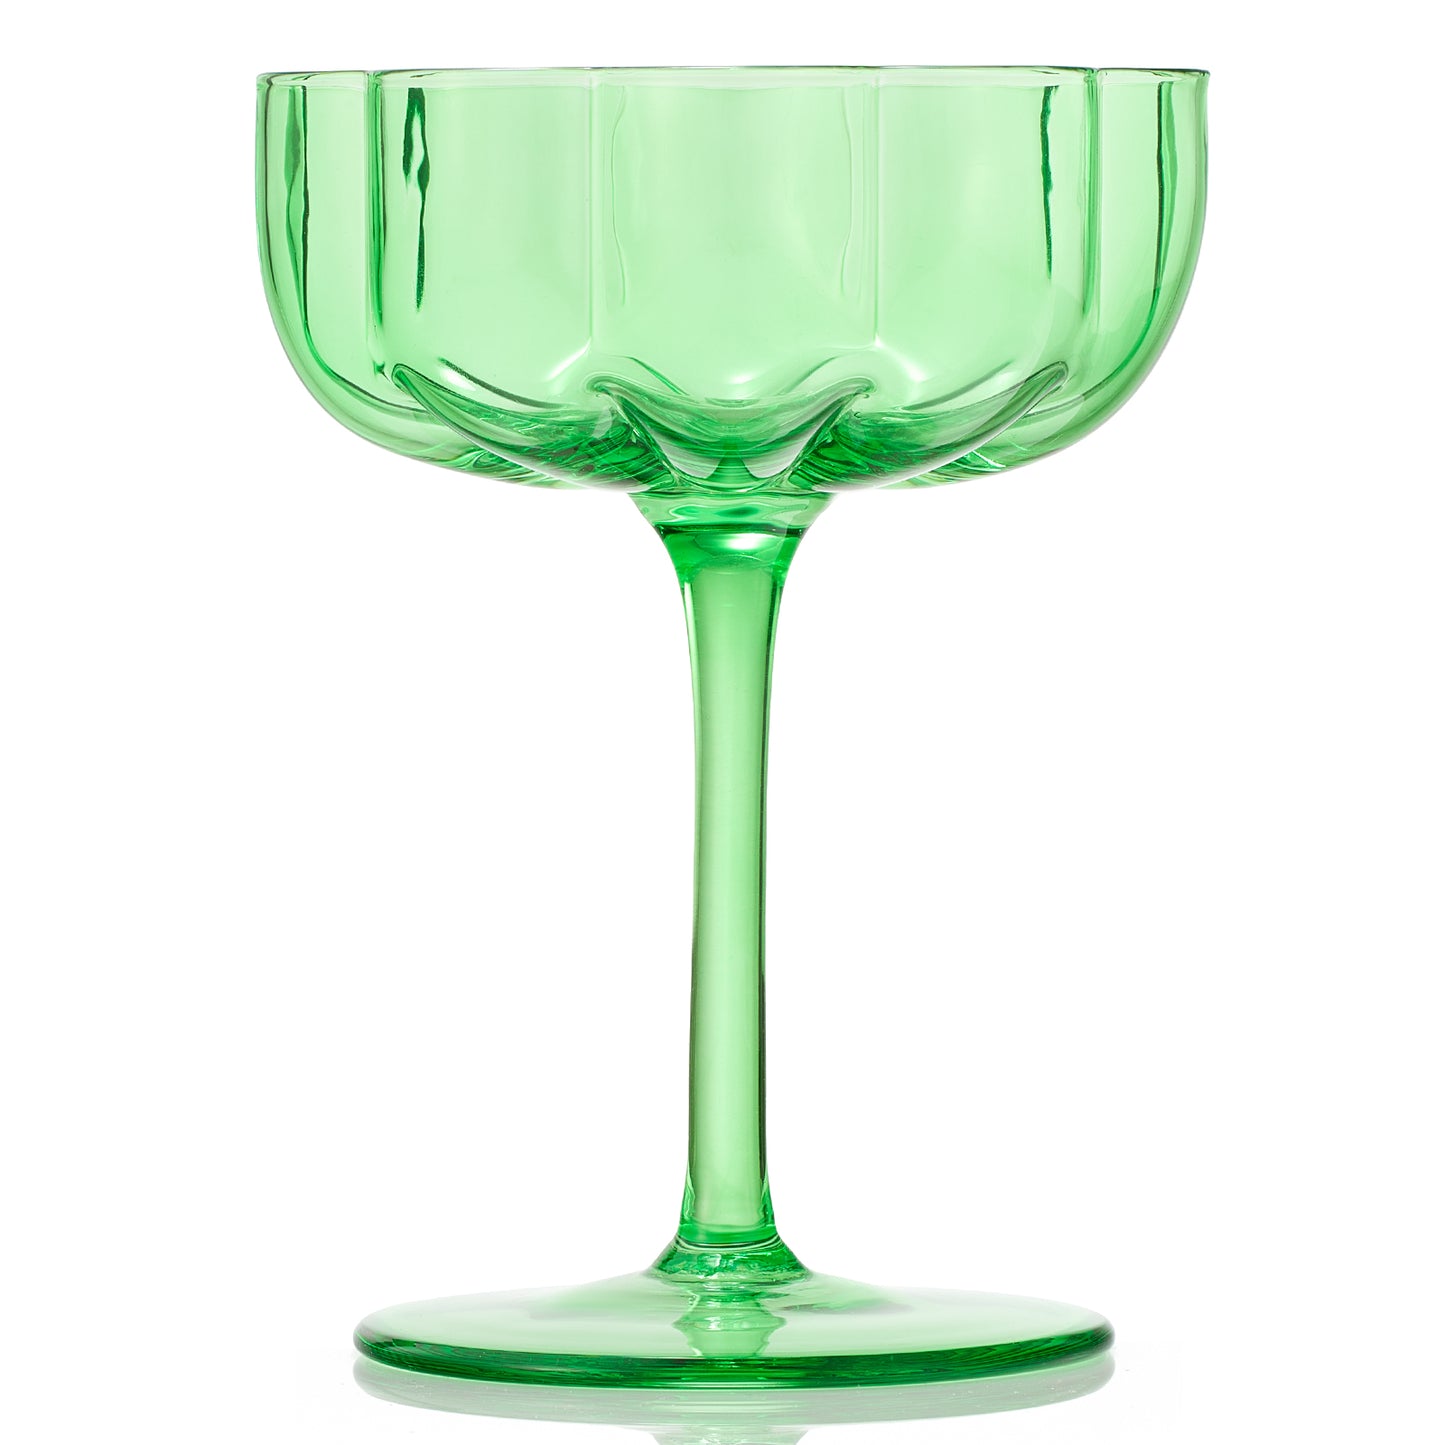 Wave Coupe Cocktail Glassware, Set of 4